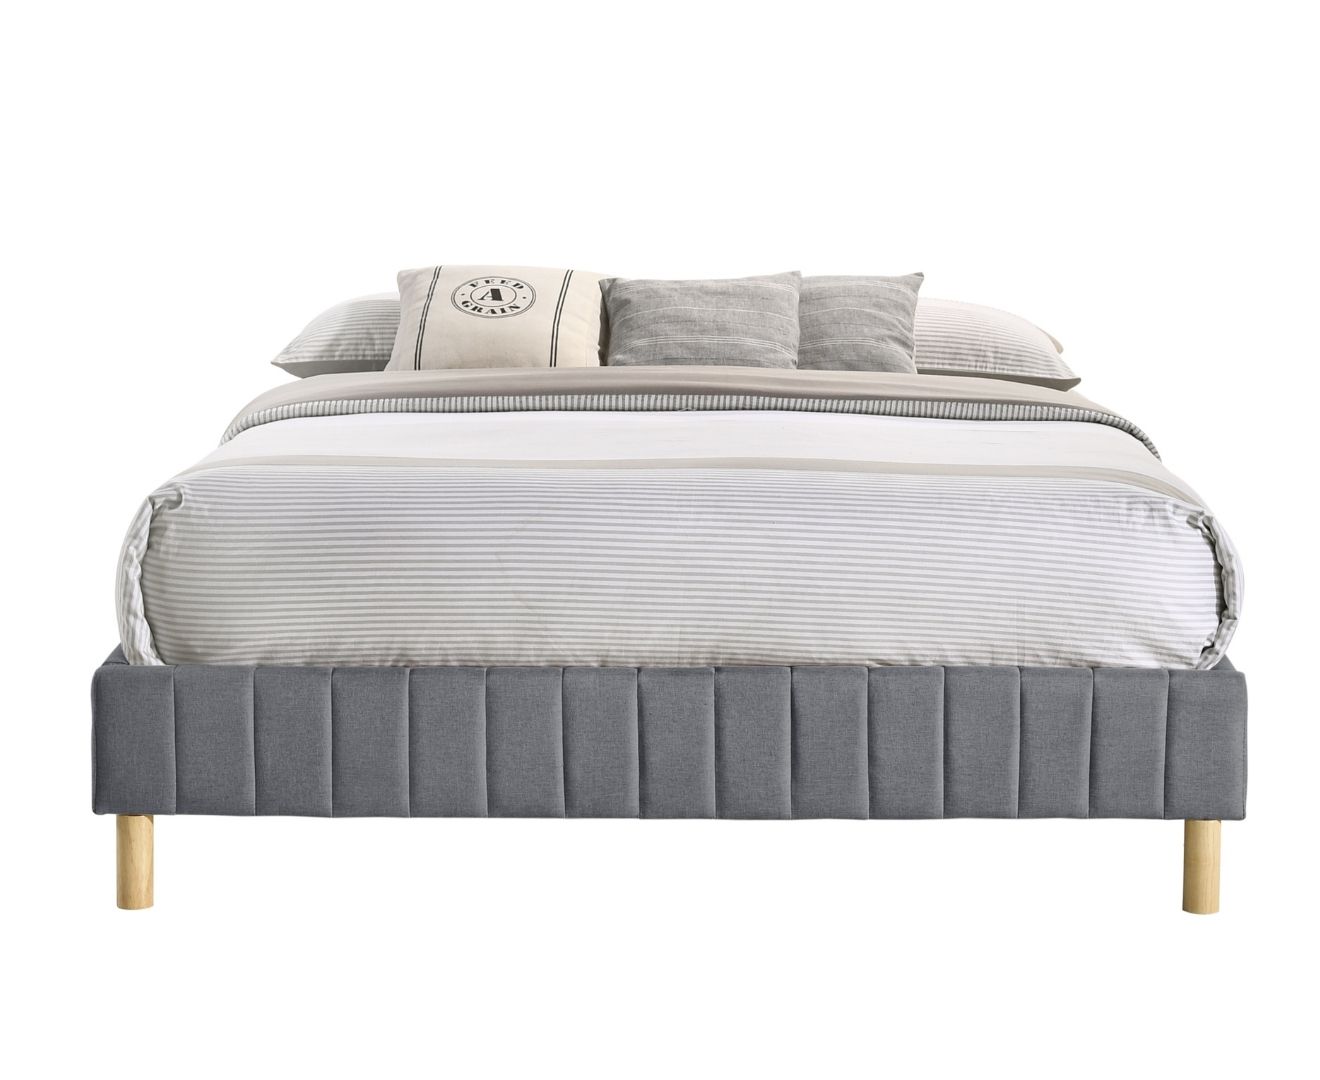 Furniture > Bedroom Contemporary Platform Bed Base Fabric Frame with Timber Slat Queen in Light Grey